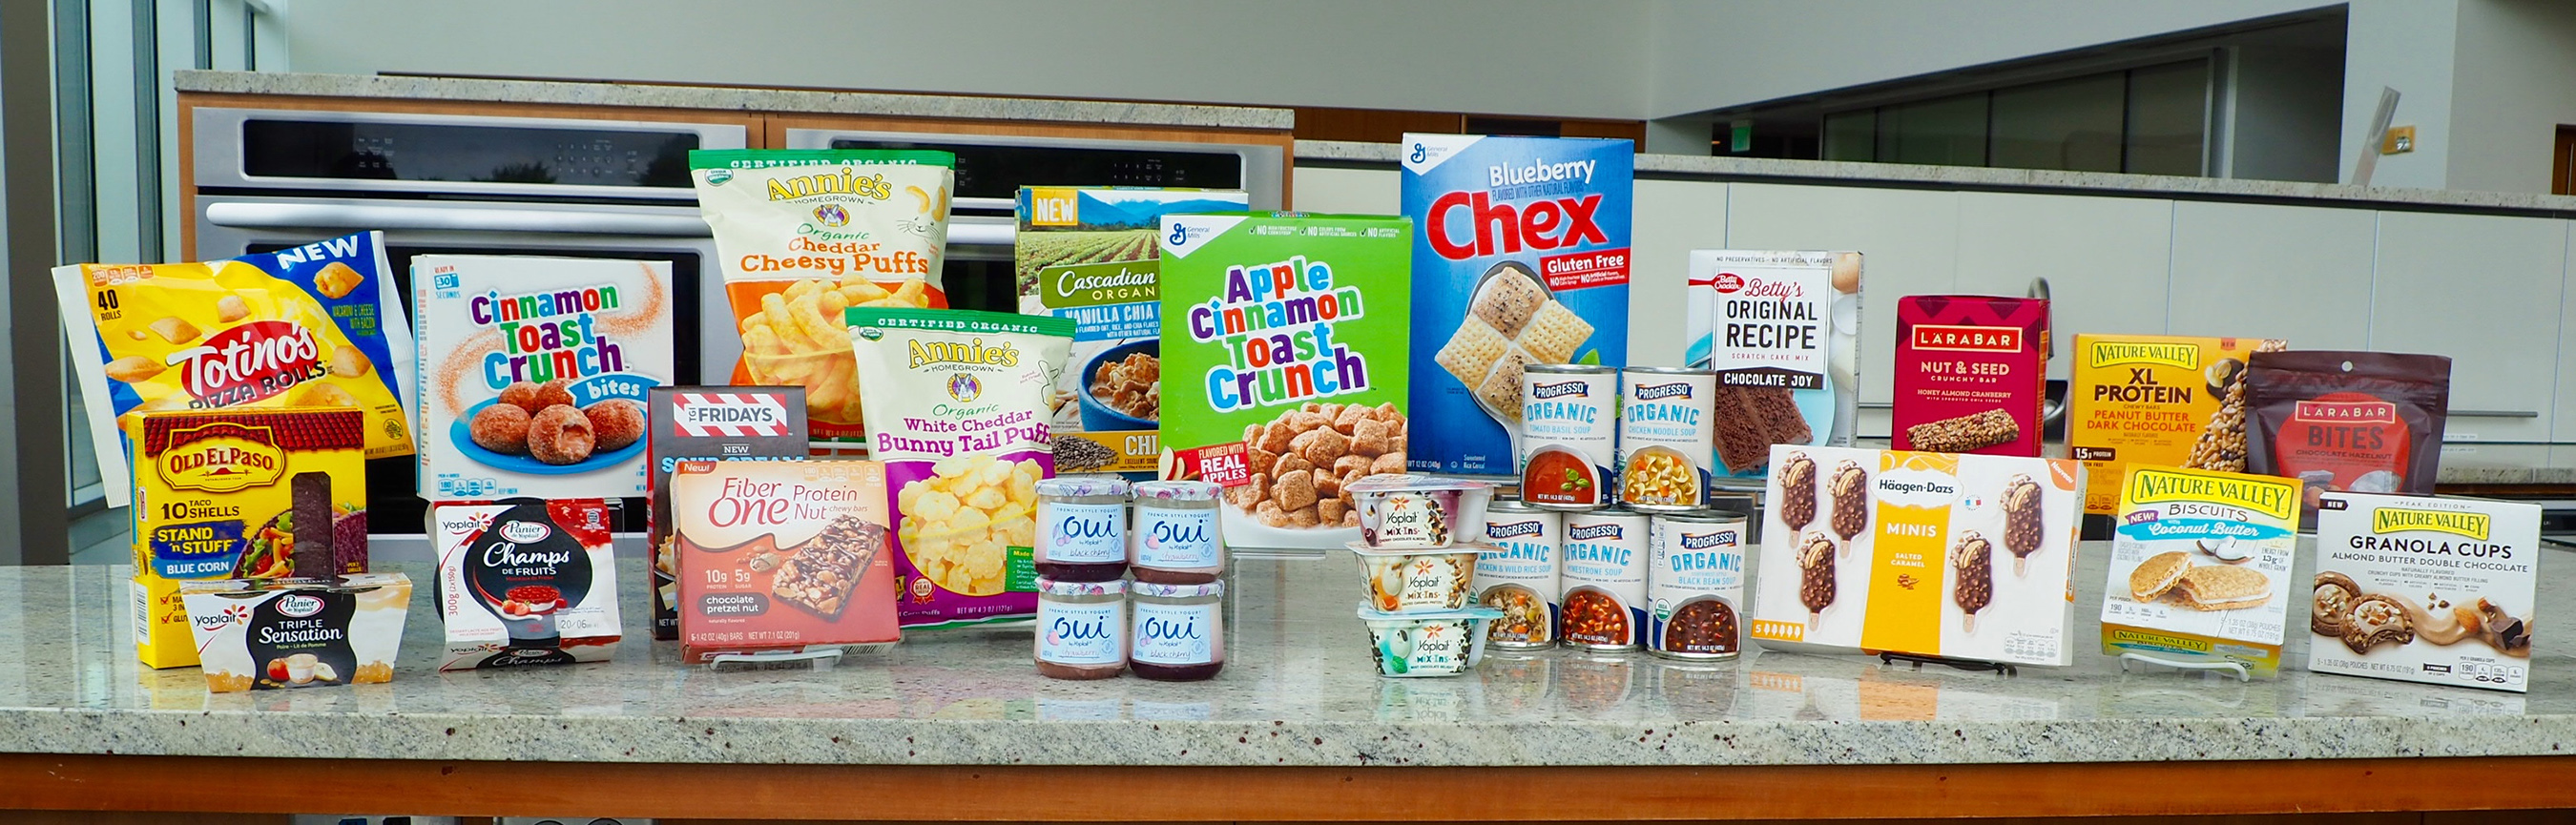 General Mills announces new products